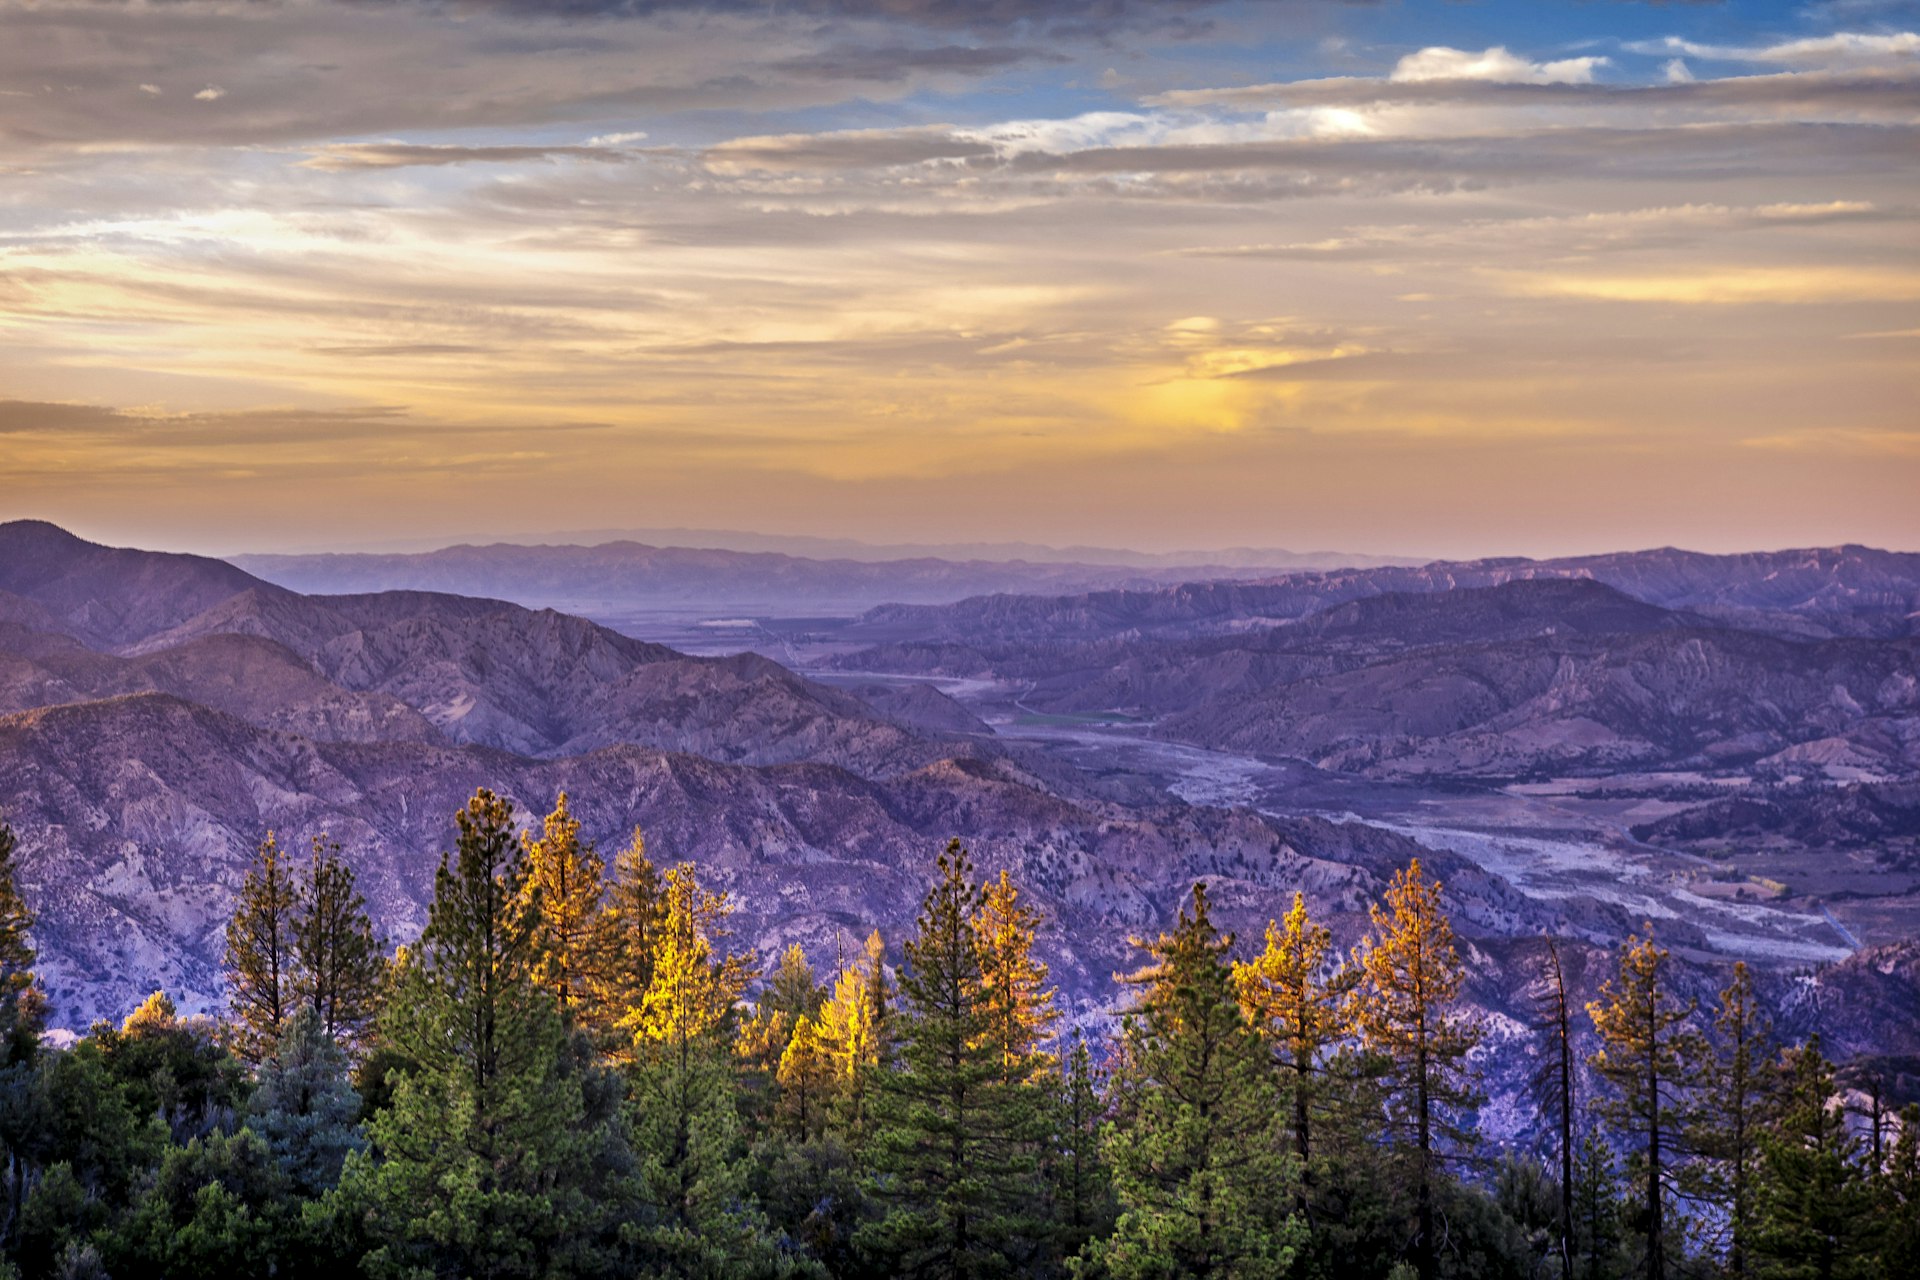 Sunset at Los Padres National Forest